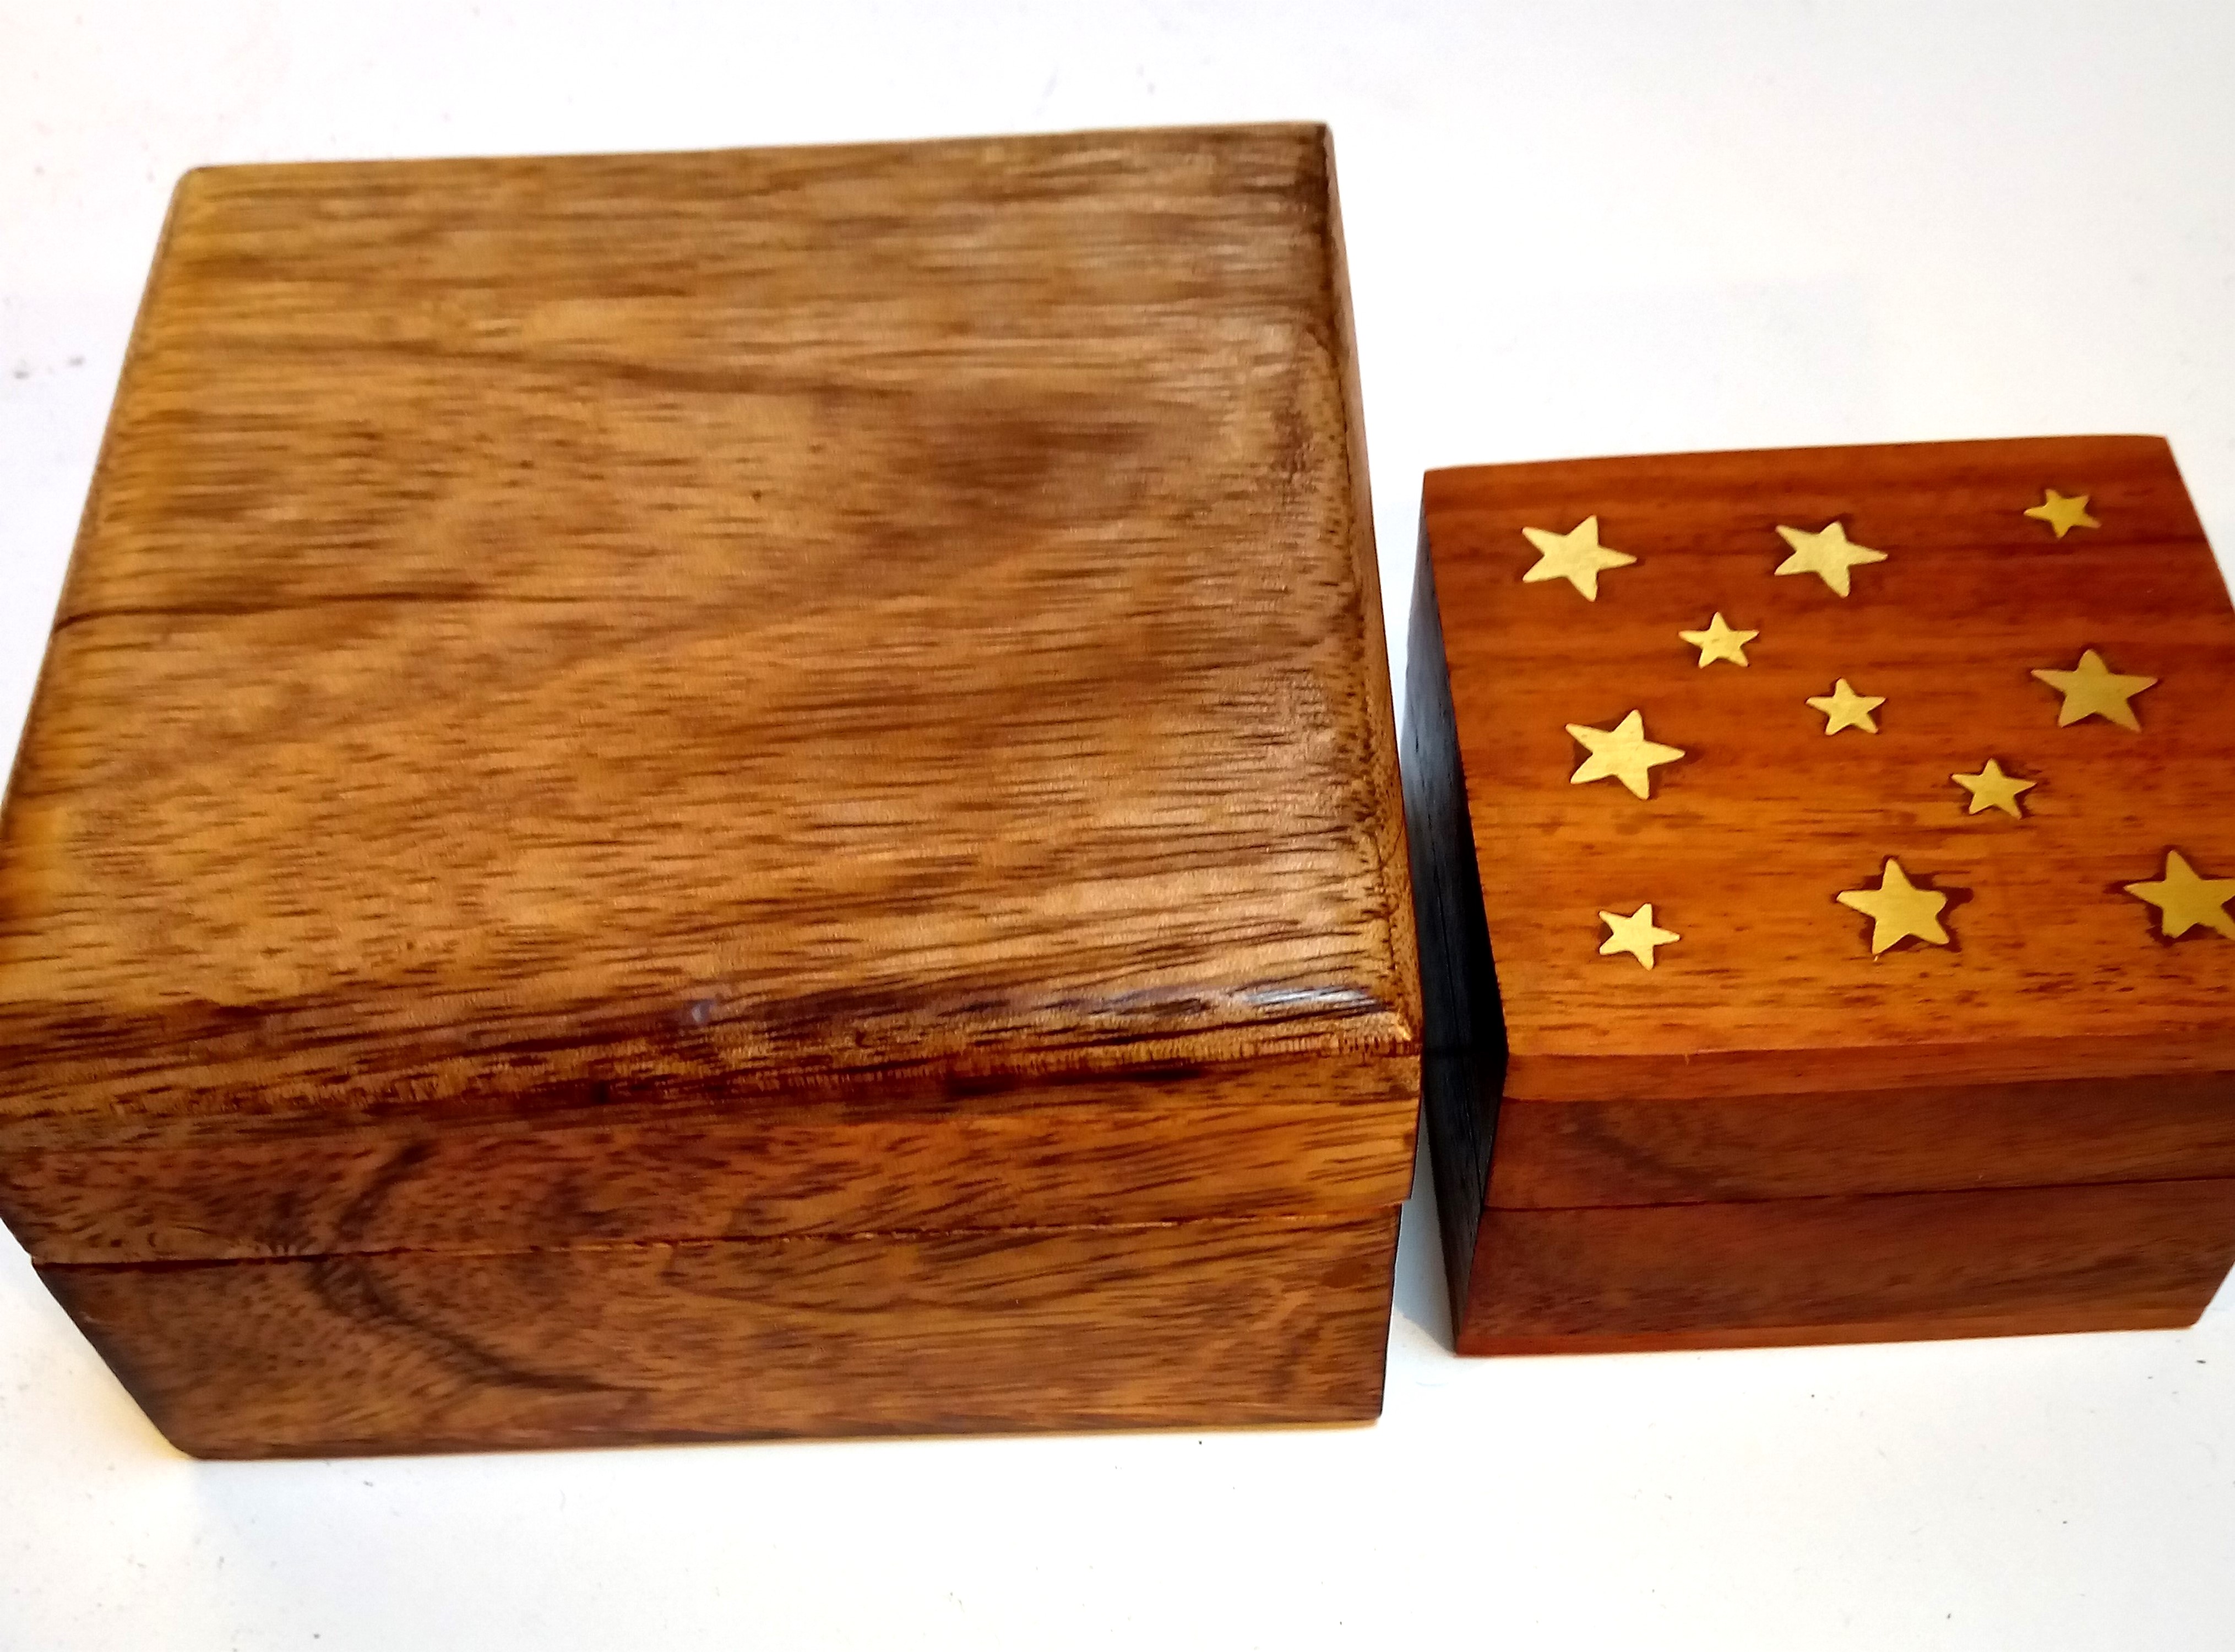 Two boxes from India. A square storage box of Mango wood with lid and a small hardwood trinket box